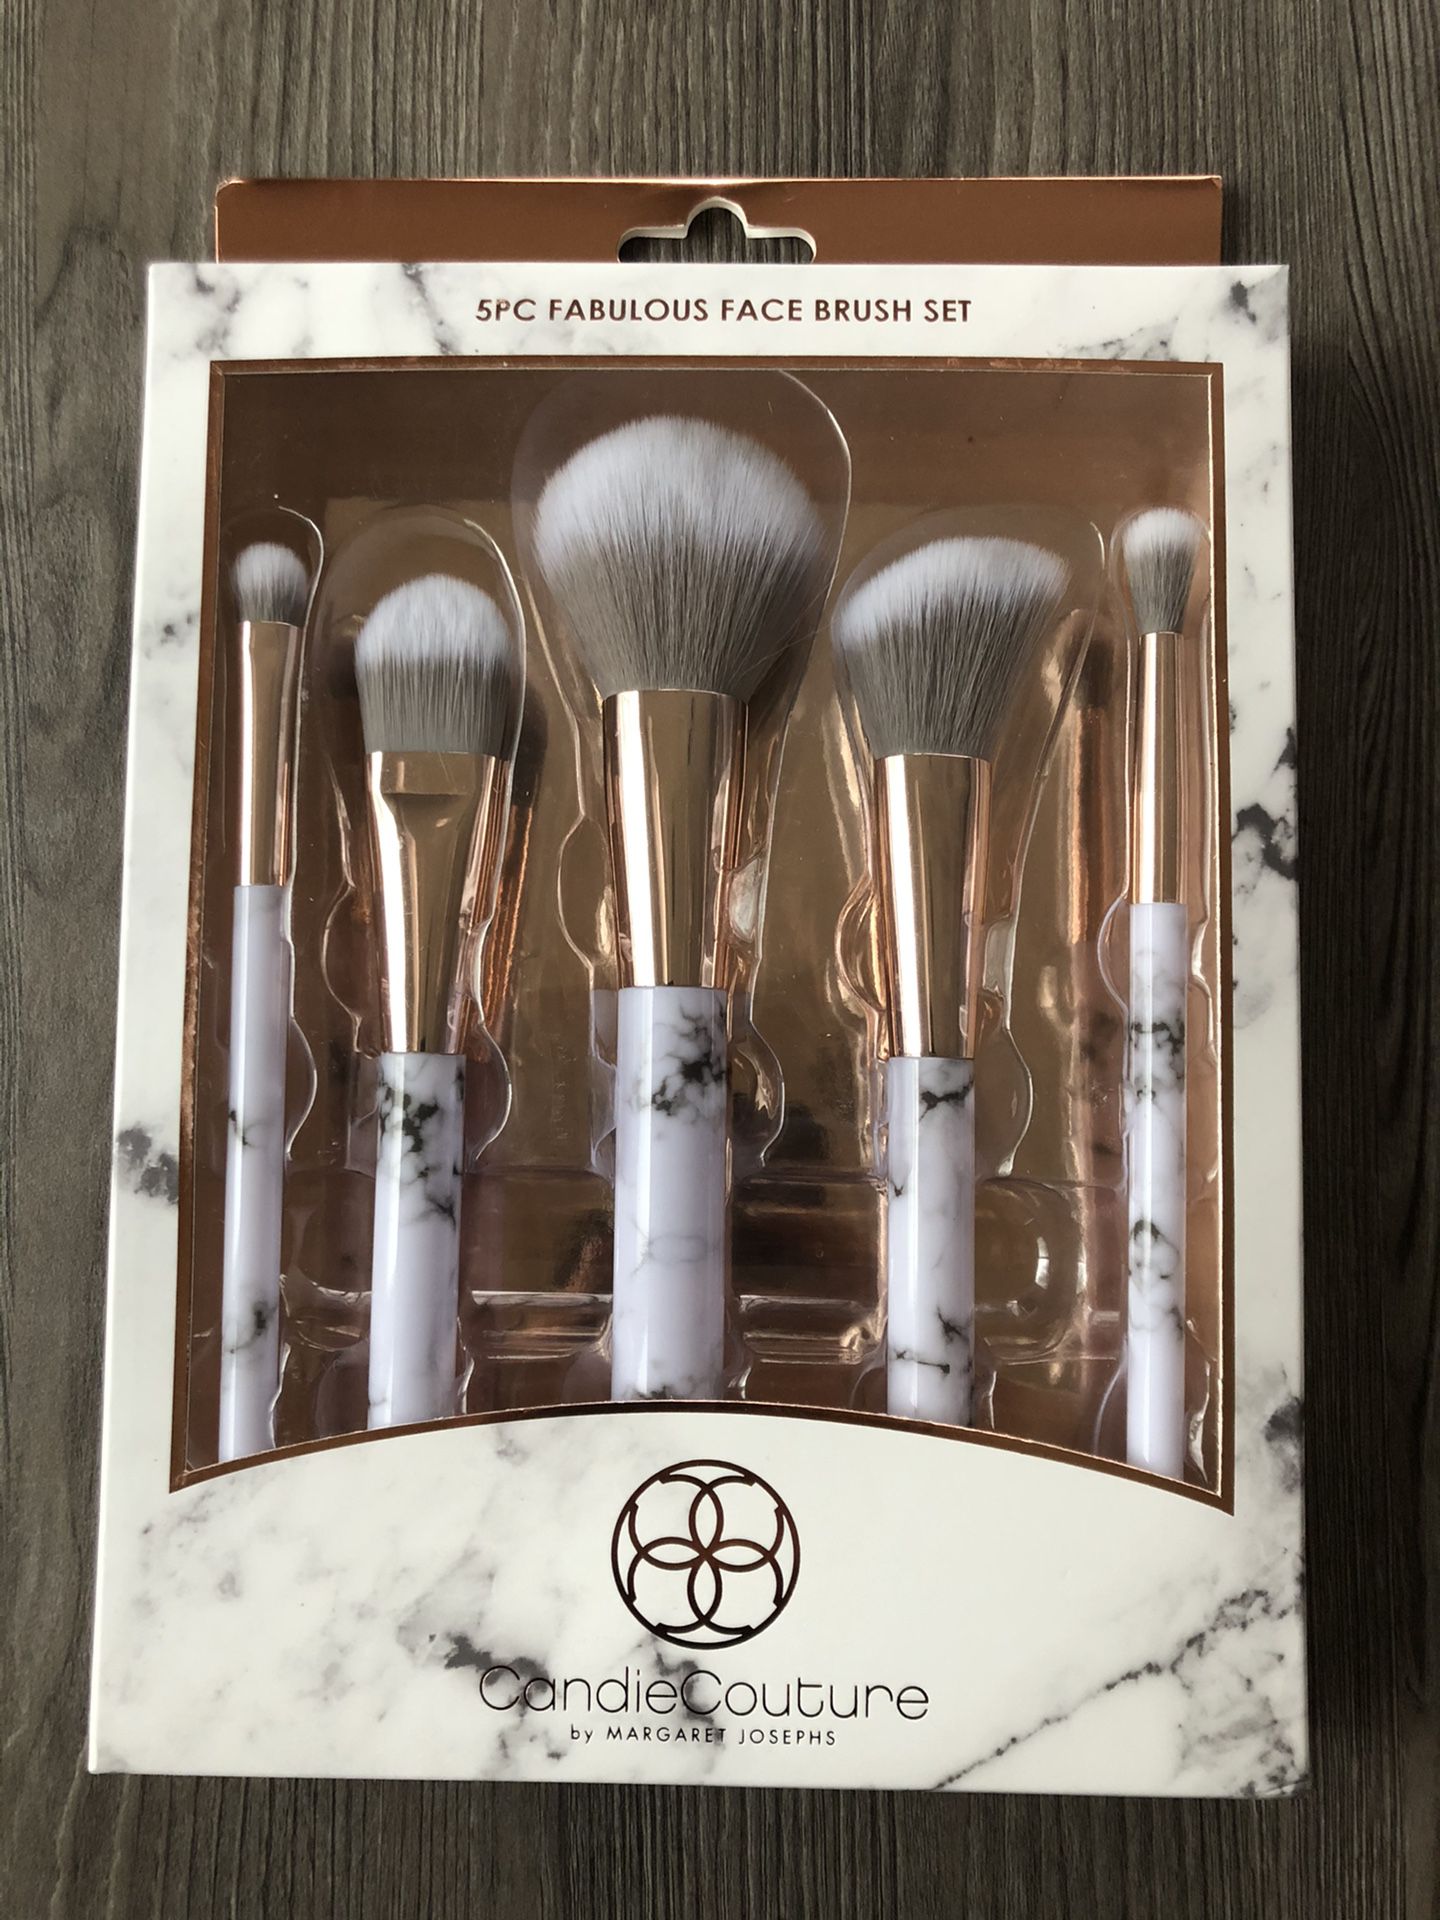 Candie Couture white marble brush set